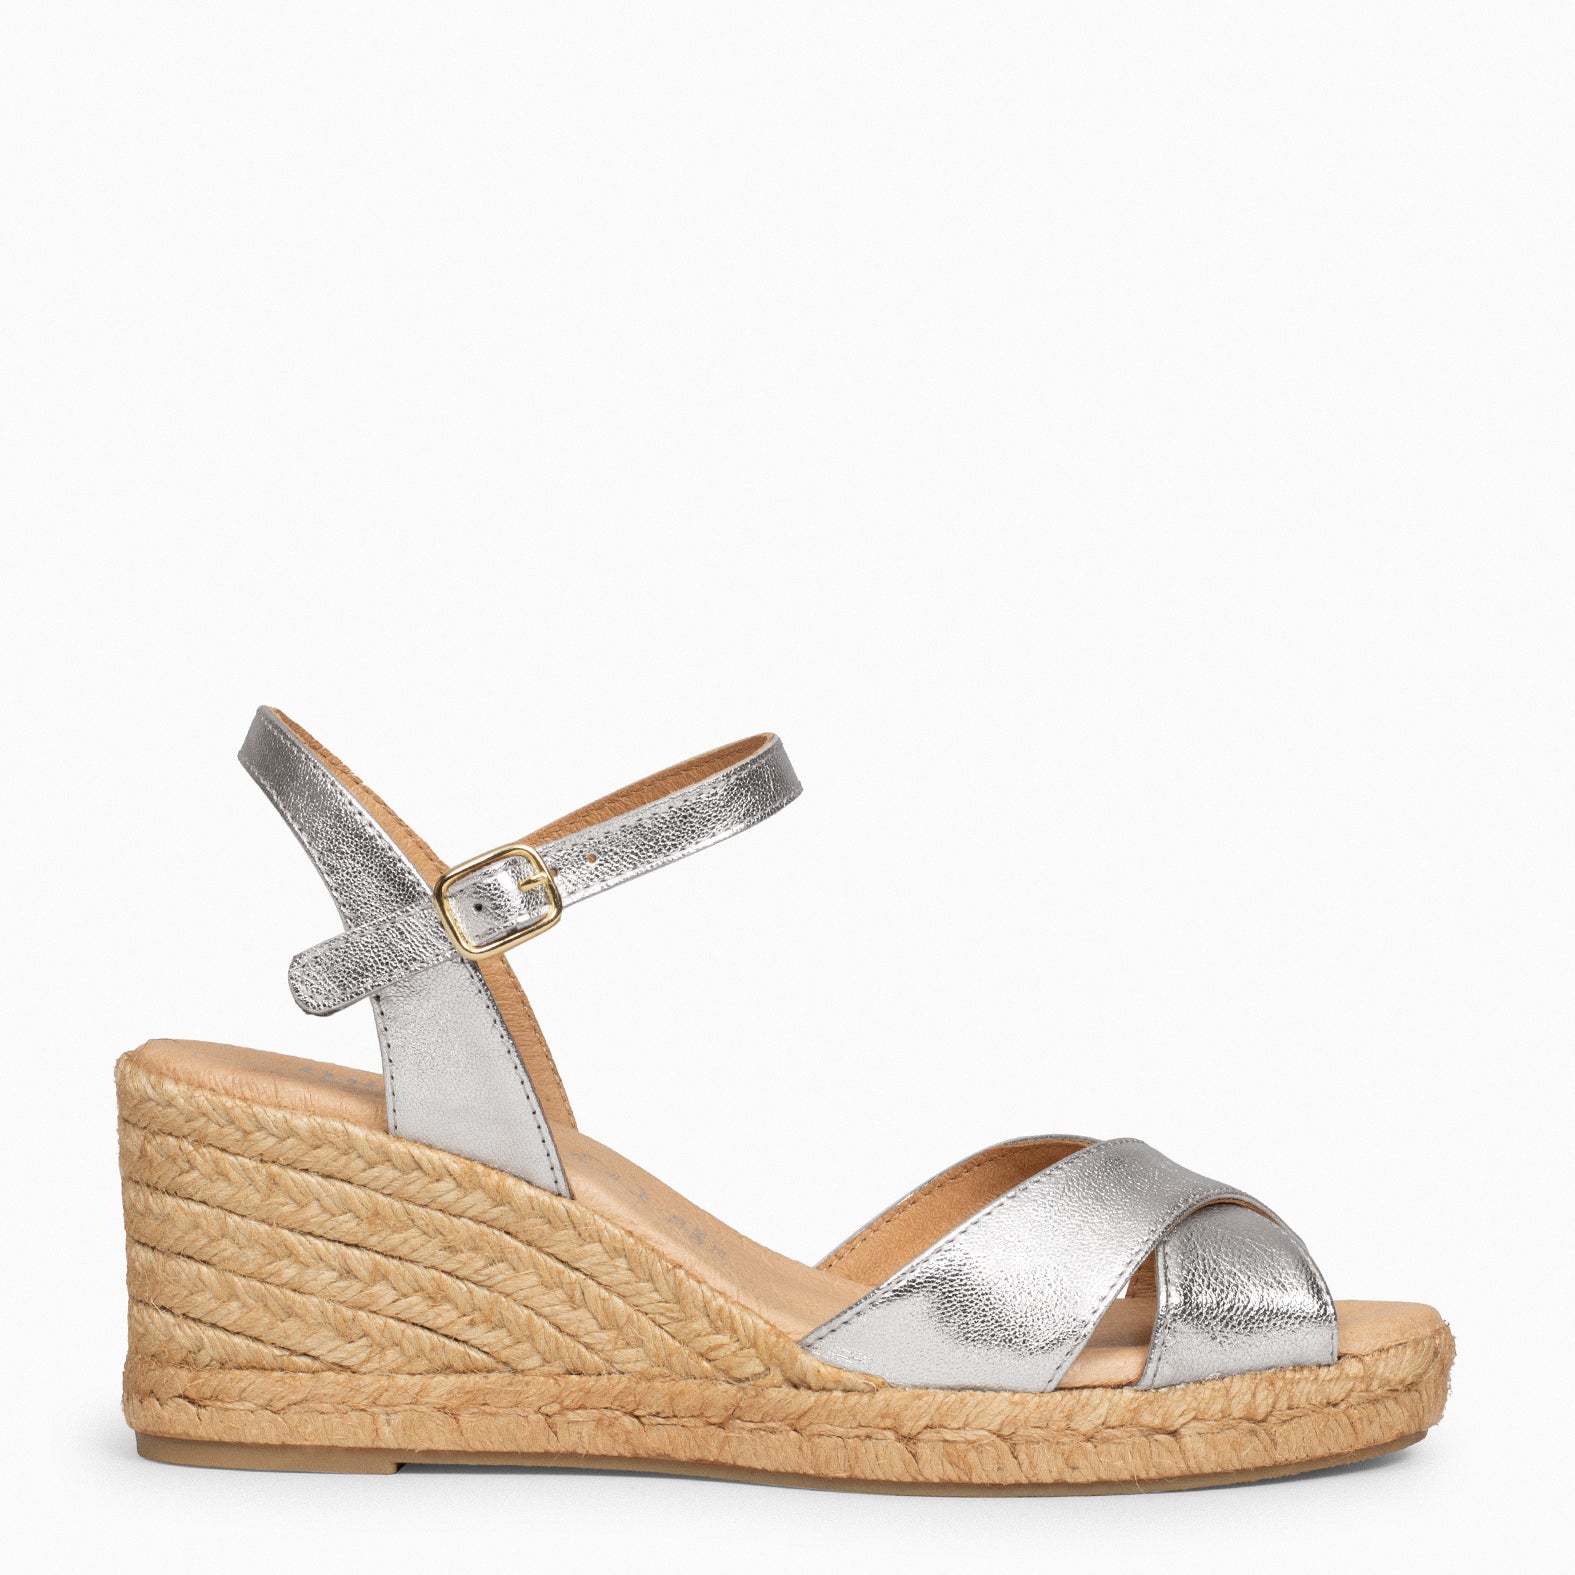 CALPE – SILVER suede leather espadrille